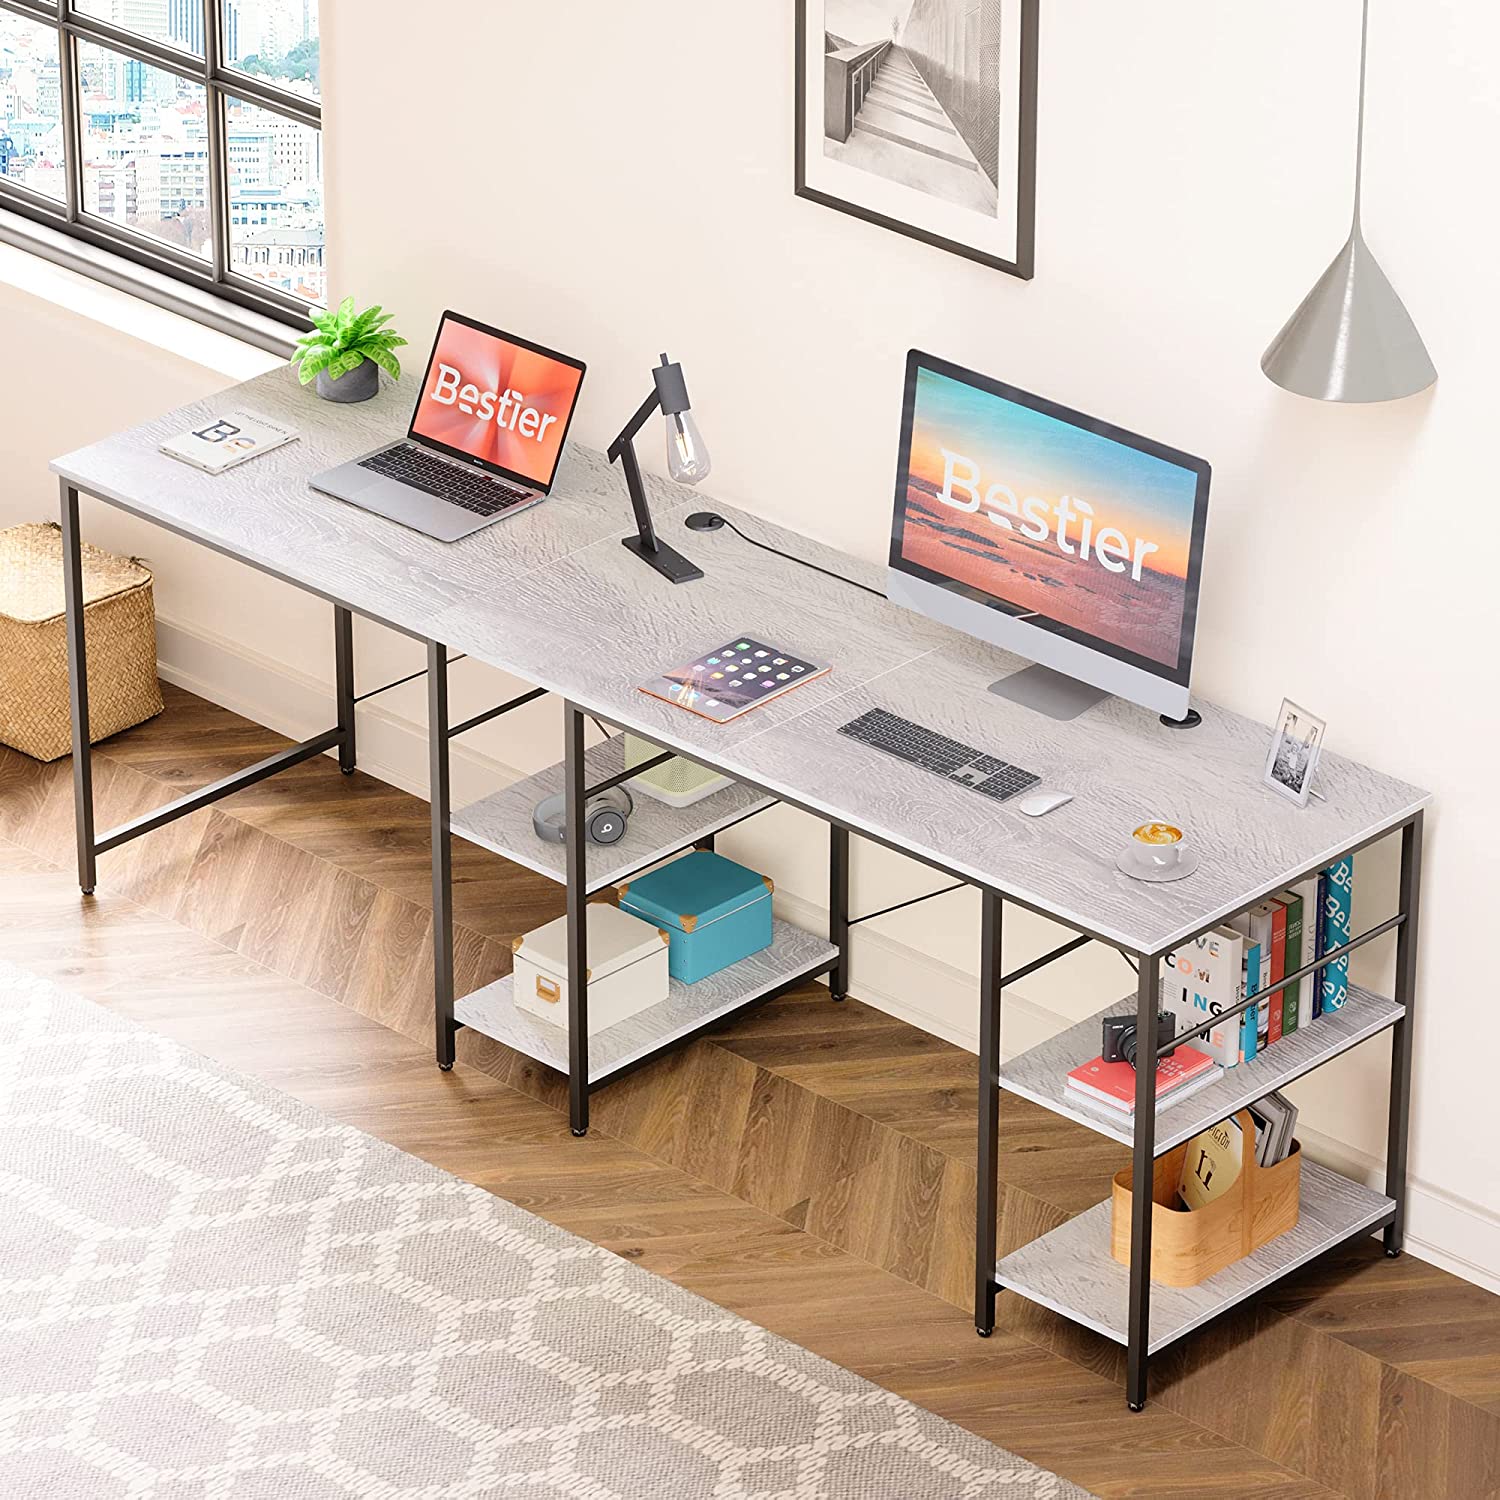 Bestier 86.6 inch Reversible L Shaped Desk with Shelves Grey - image 4 of 10